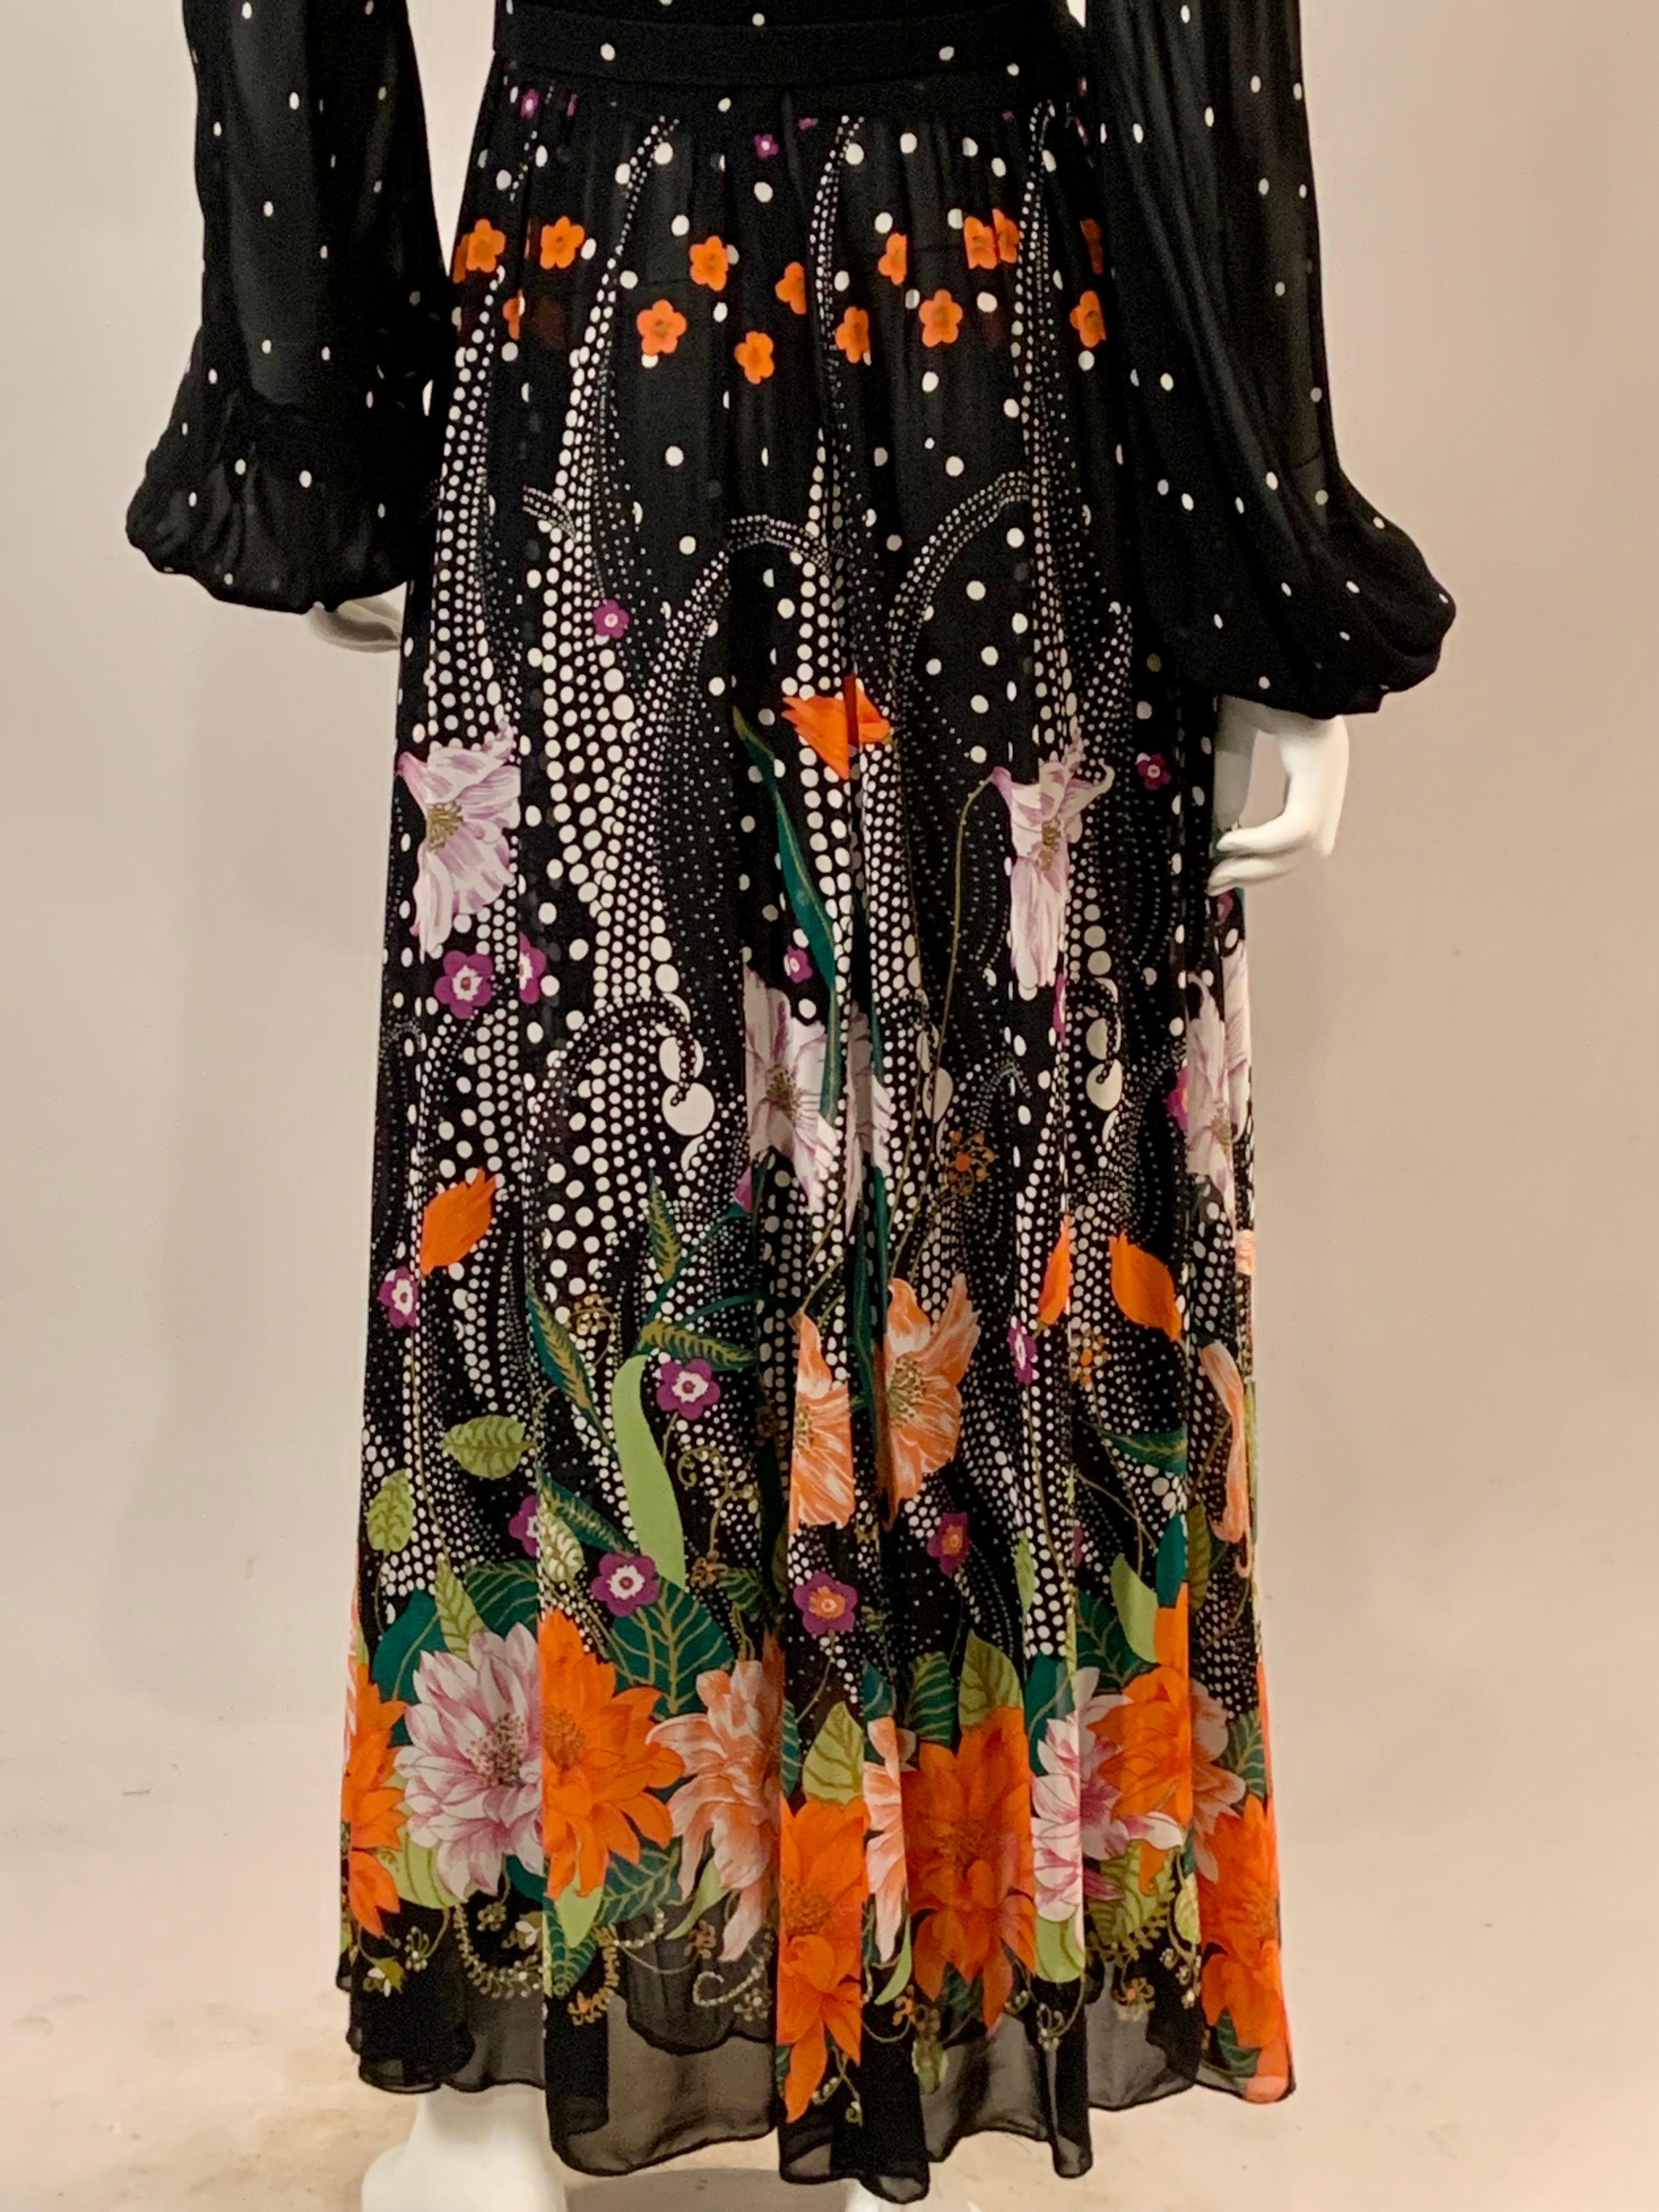 1970's Chiffon Maxi Dress with a Polka Dot and Flower Print For Sale 4